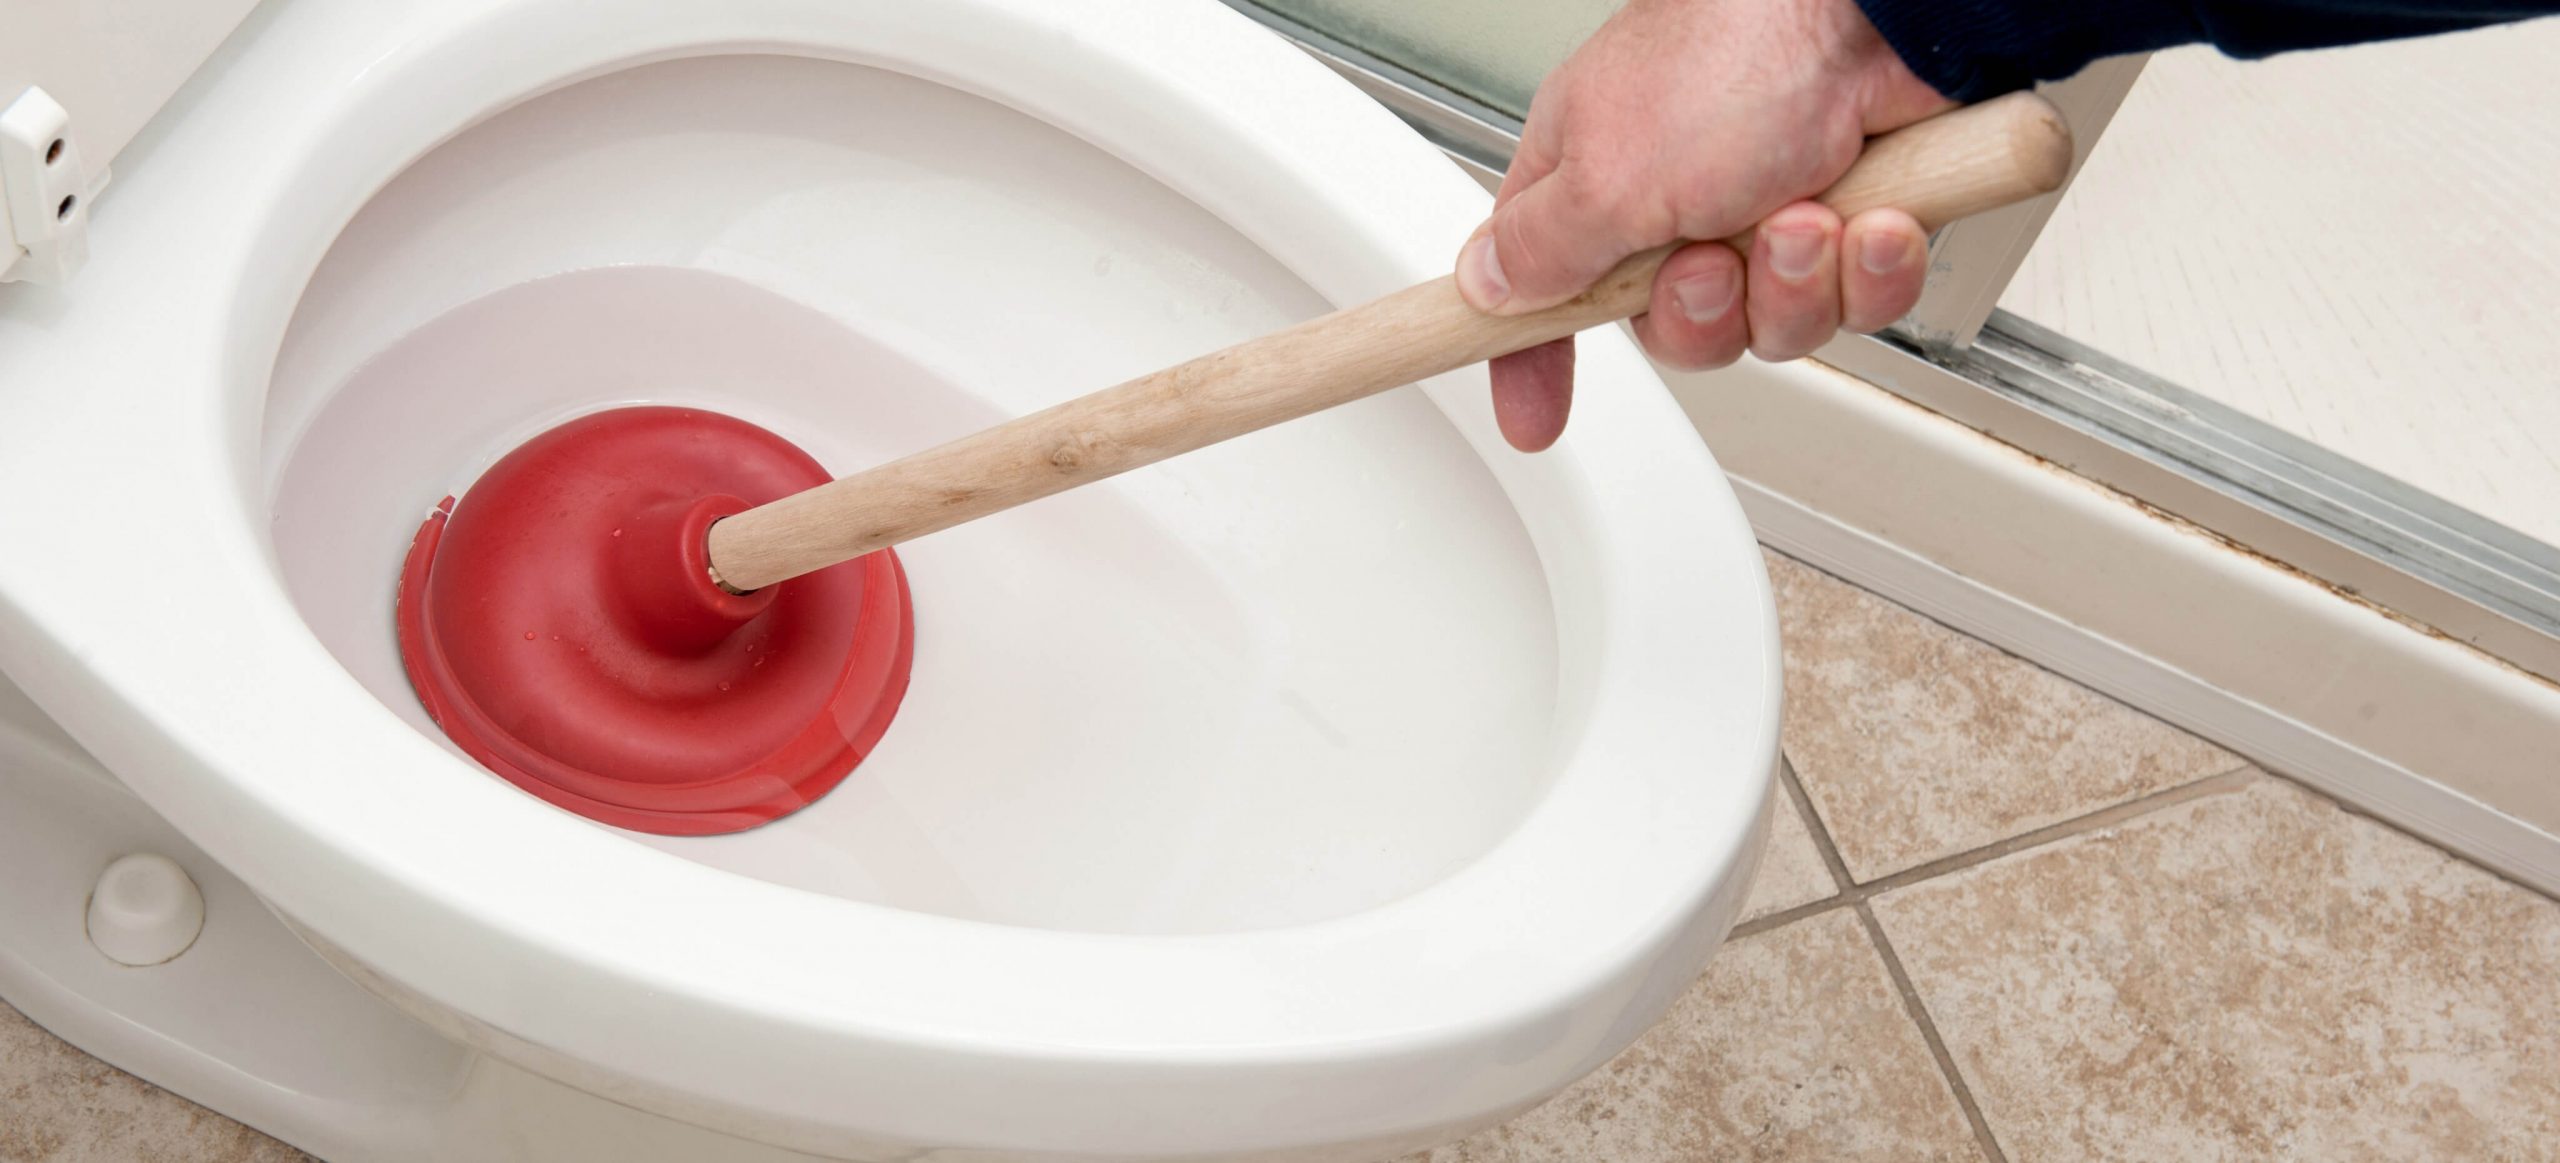 How to Unblock a Toilet  23 Common Ways  My Plumber